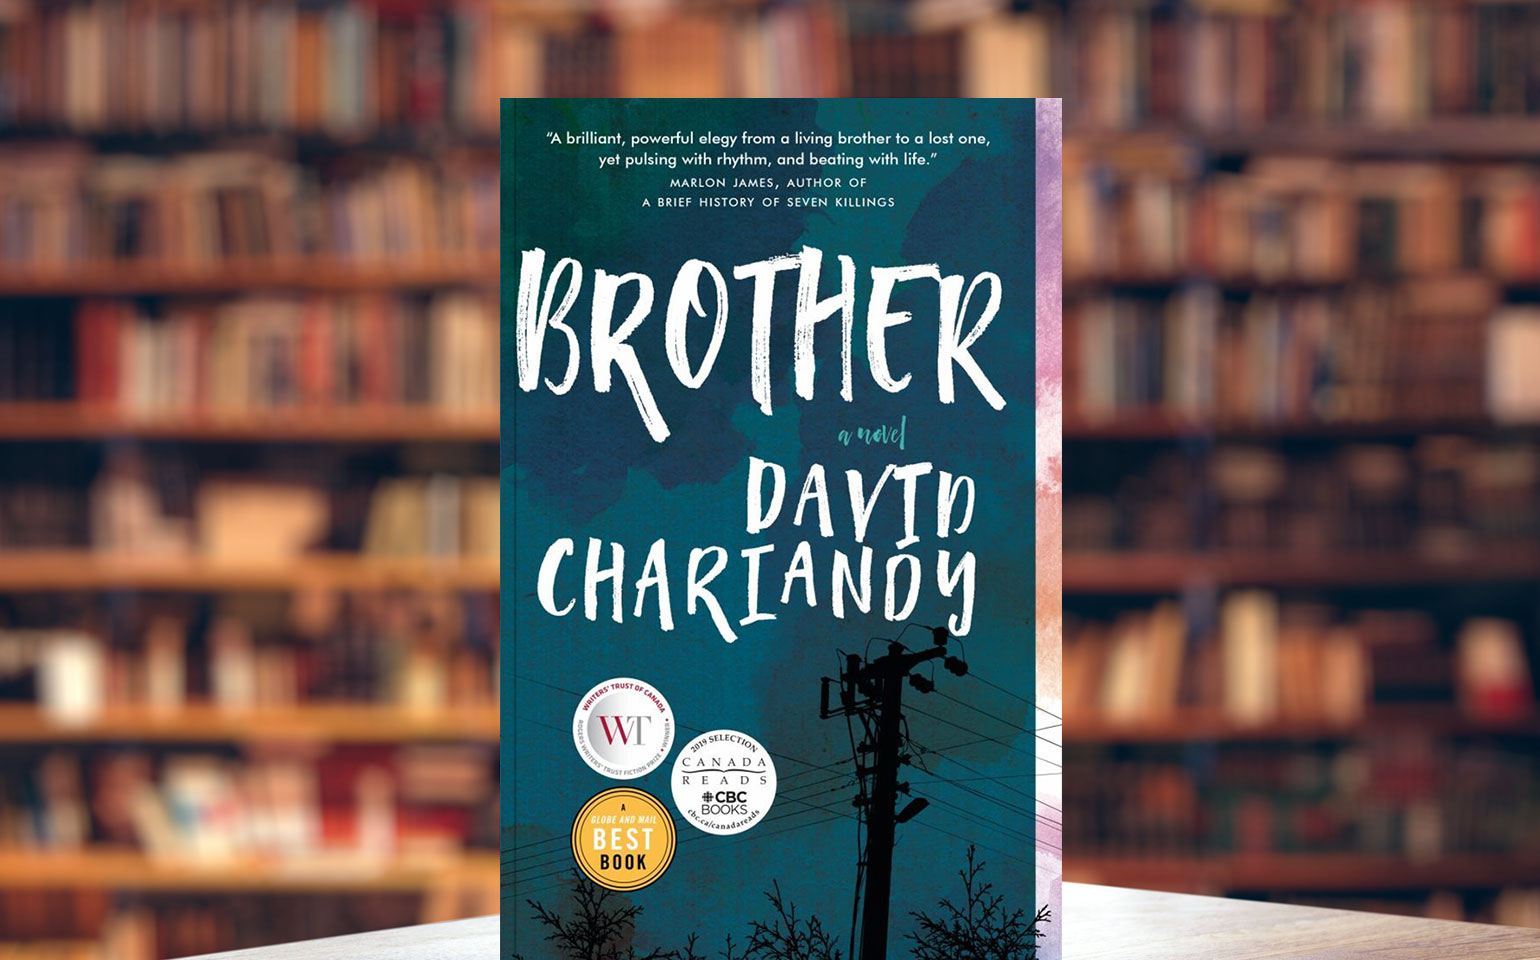 The cover of David Chariandy's "Brother" is shown against the backdrop of bookshelves. It depicts powerlines against a blank, cloudy sky.